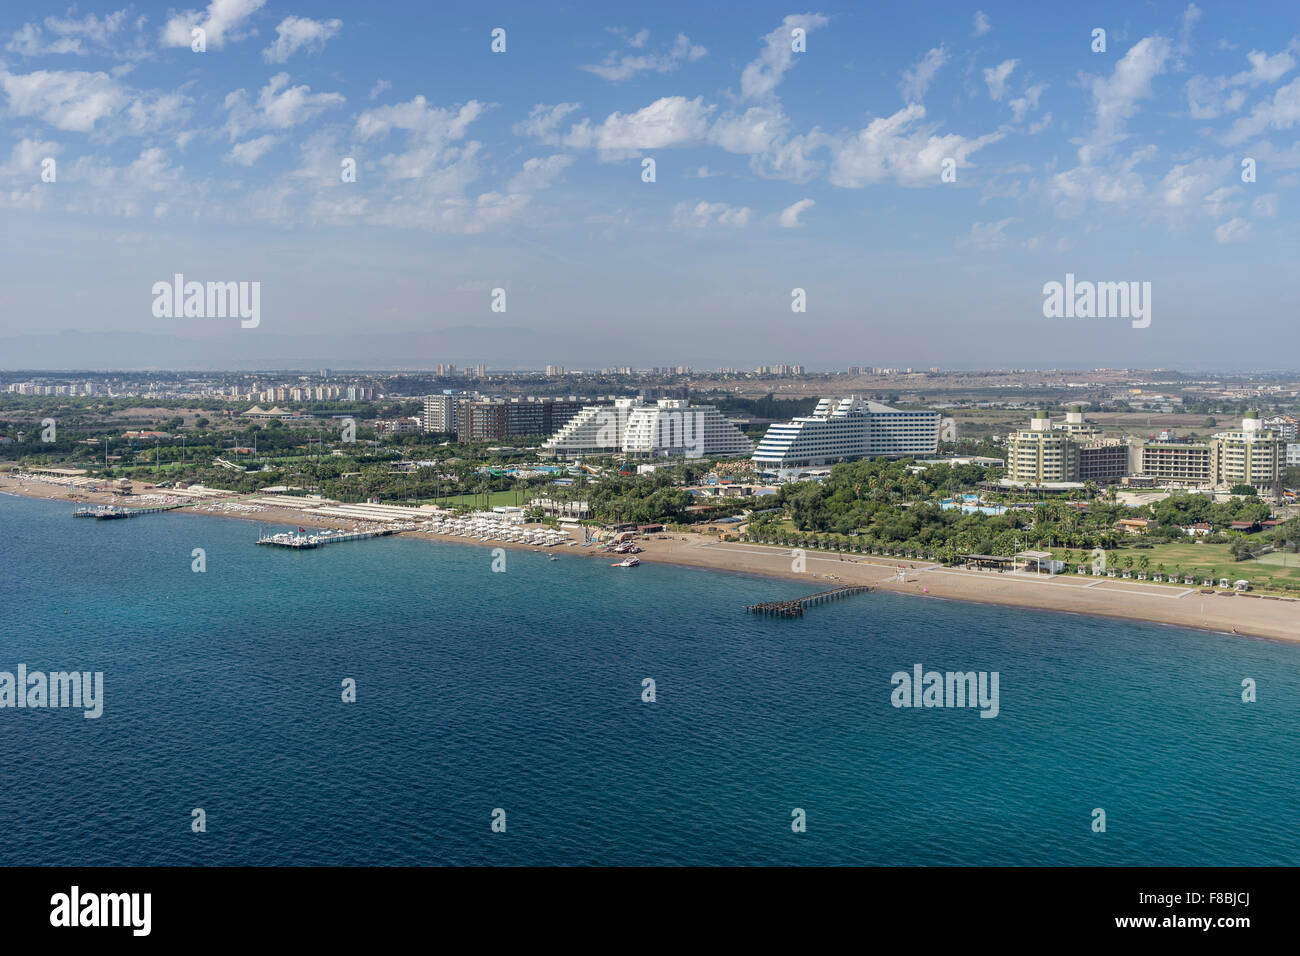 Large hotel complexes by the beach, Antalya, Turkey Stock Photo